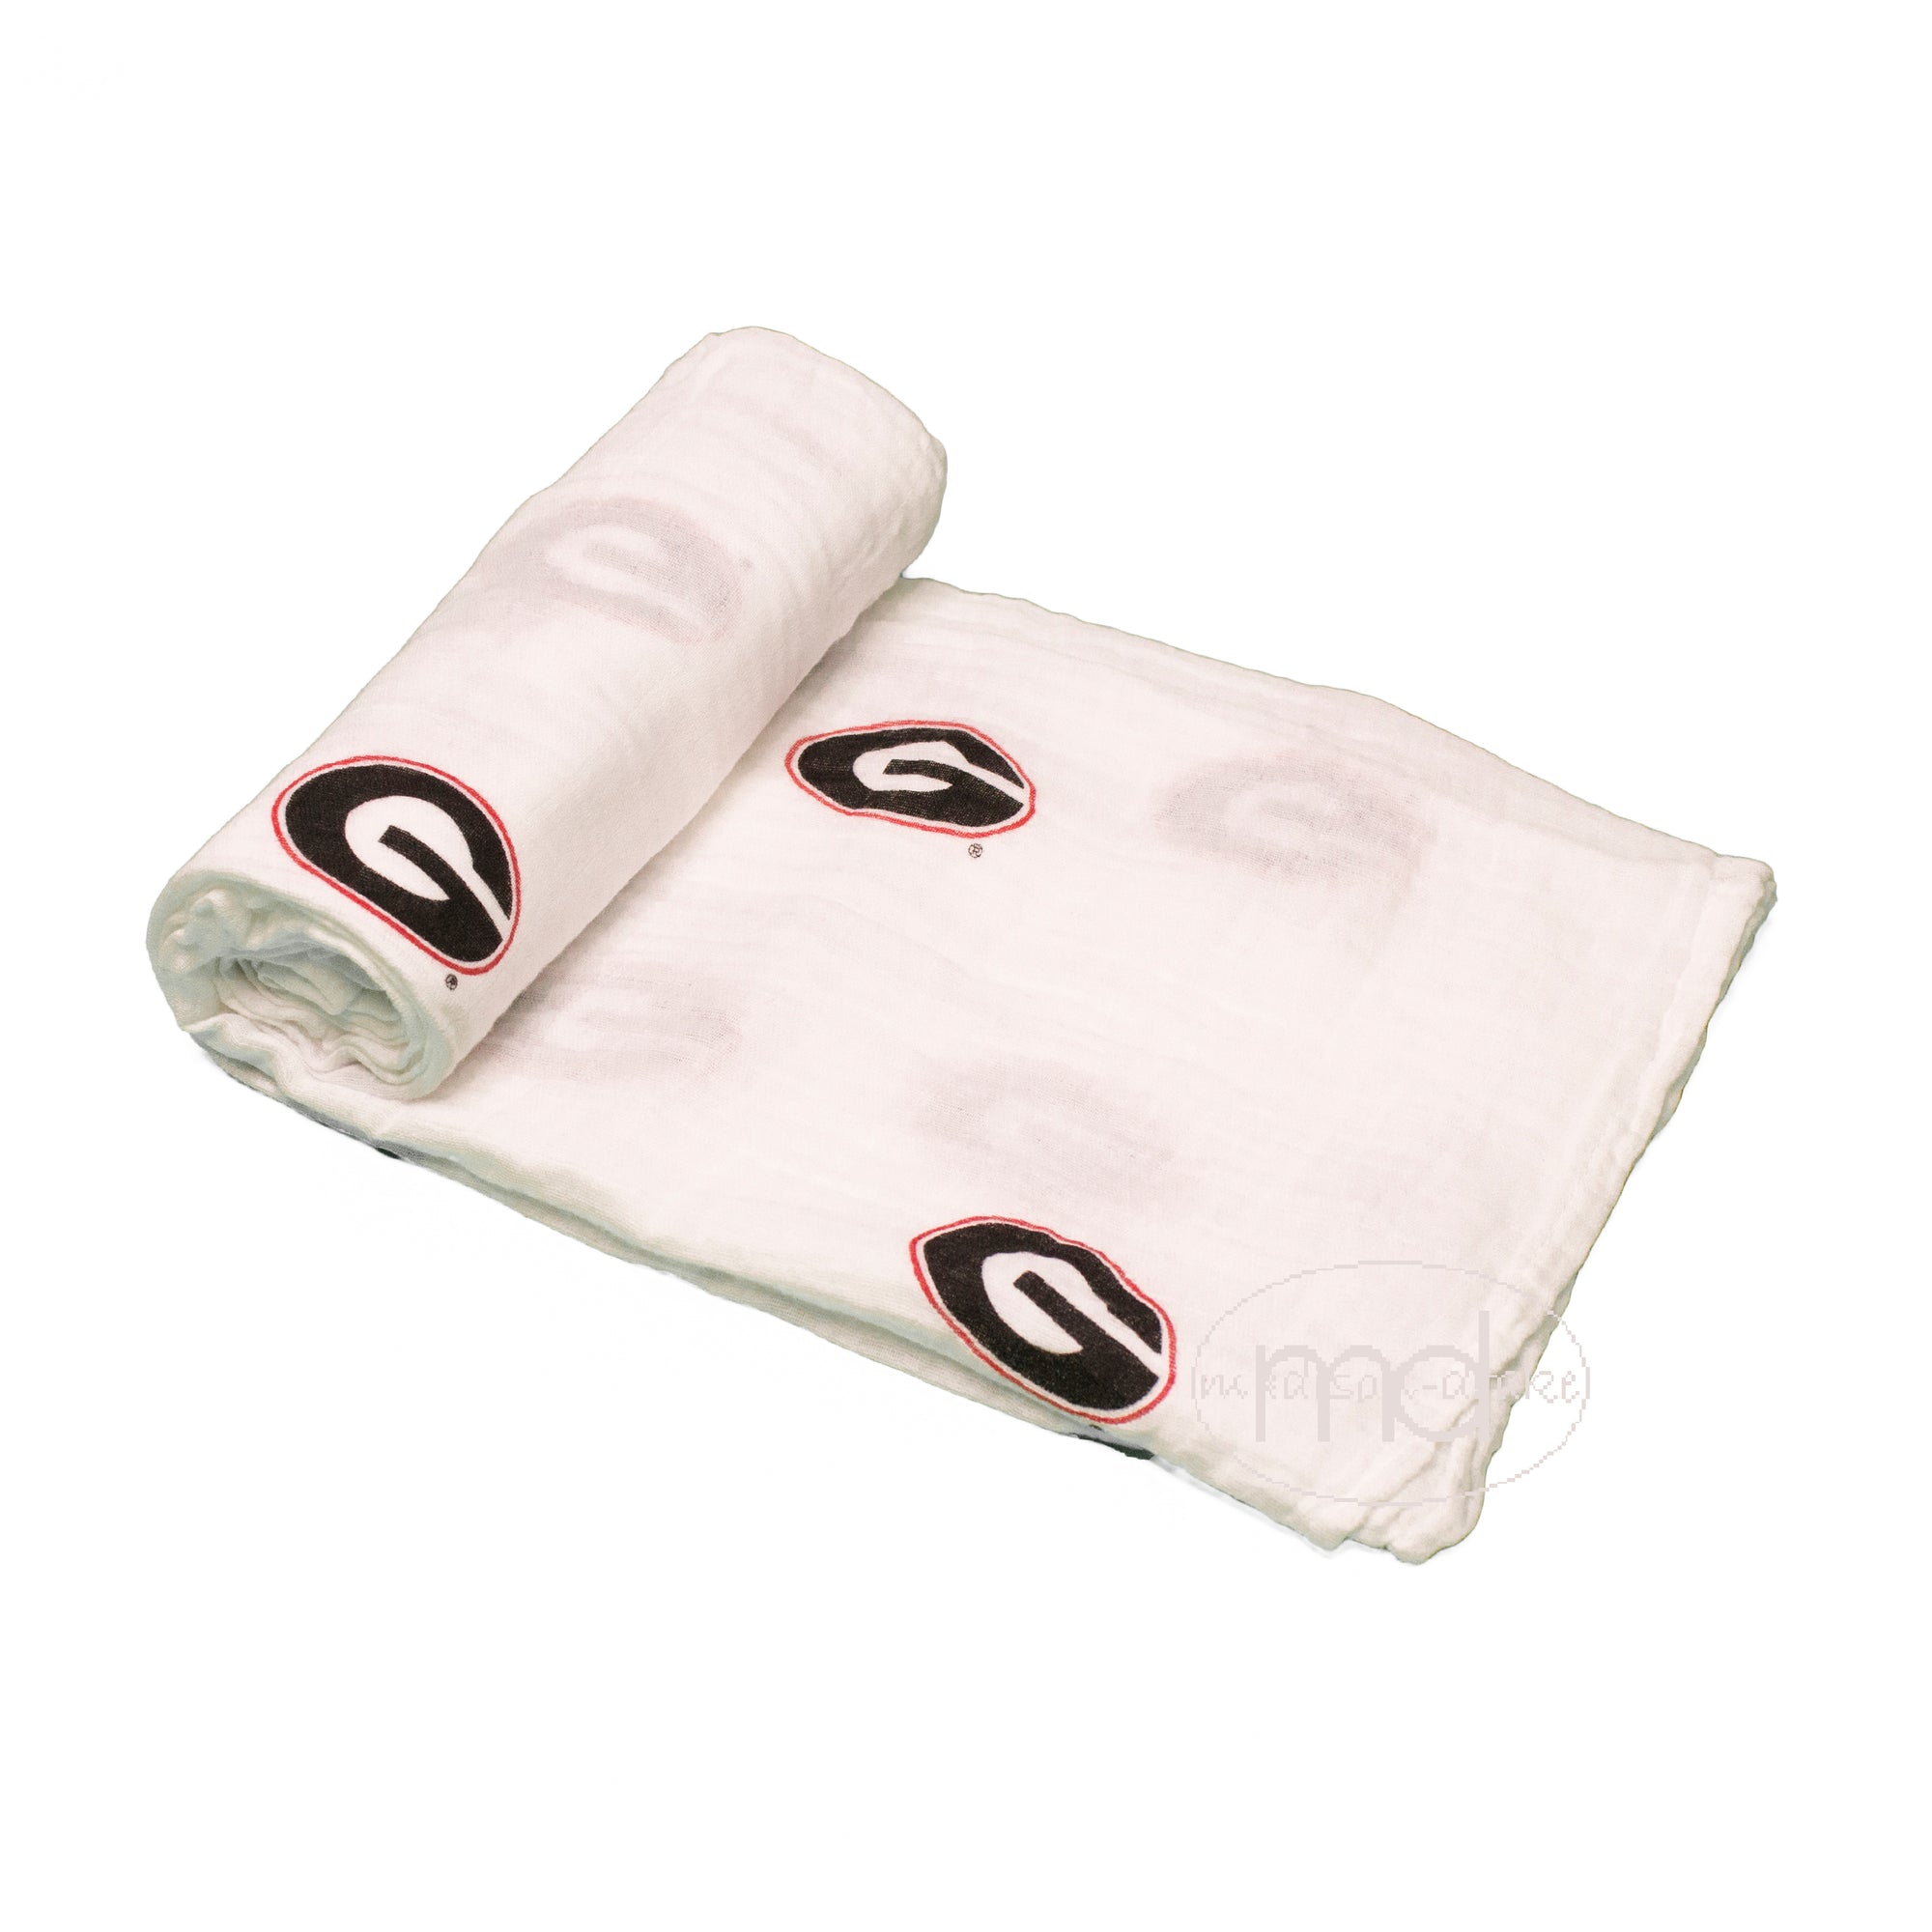 Officially Licensed University of Georgia Cotton Muslin Swaddle Blanket